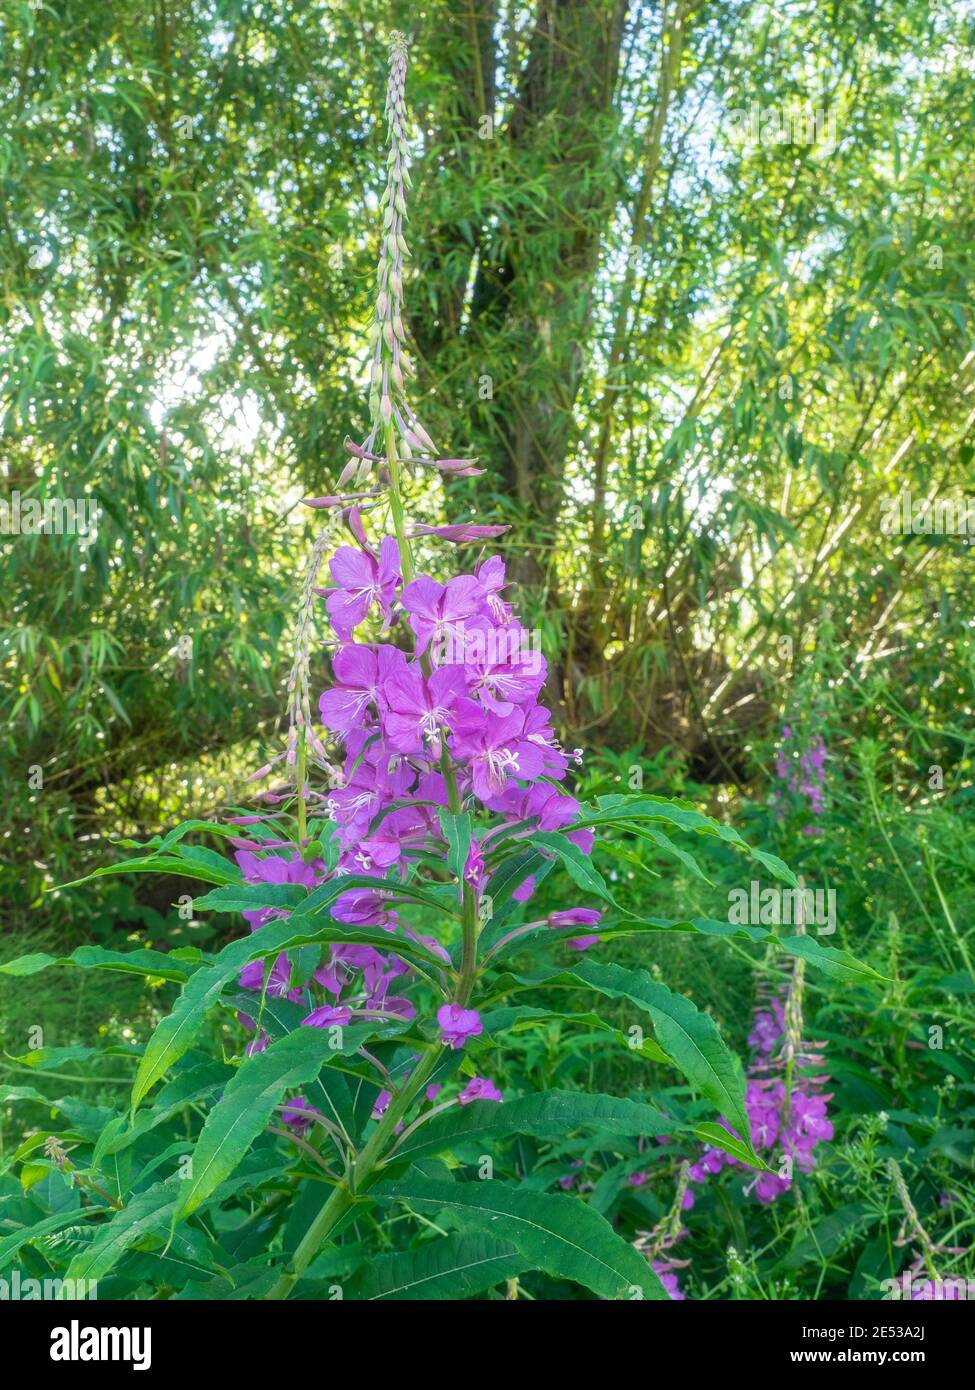 Purple loosestrife (Lythrum salicaria) is a flowering plant belonging to the family Lythraceae. It should not be confused with other plants sharing th Stock Photo